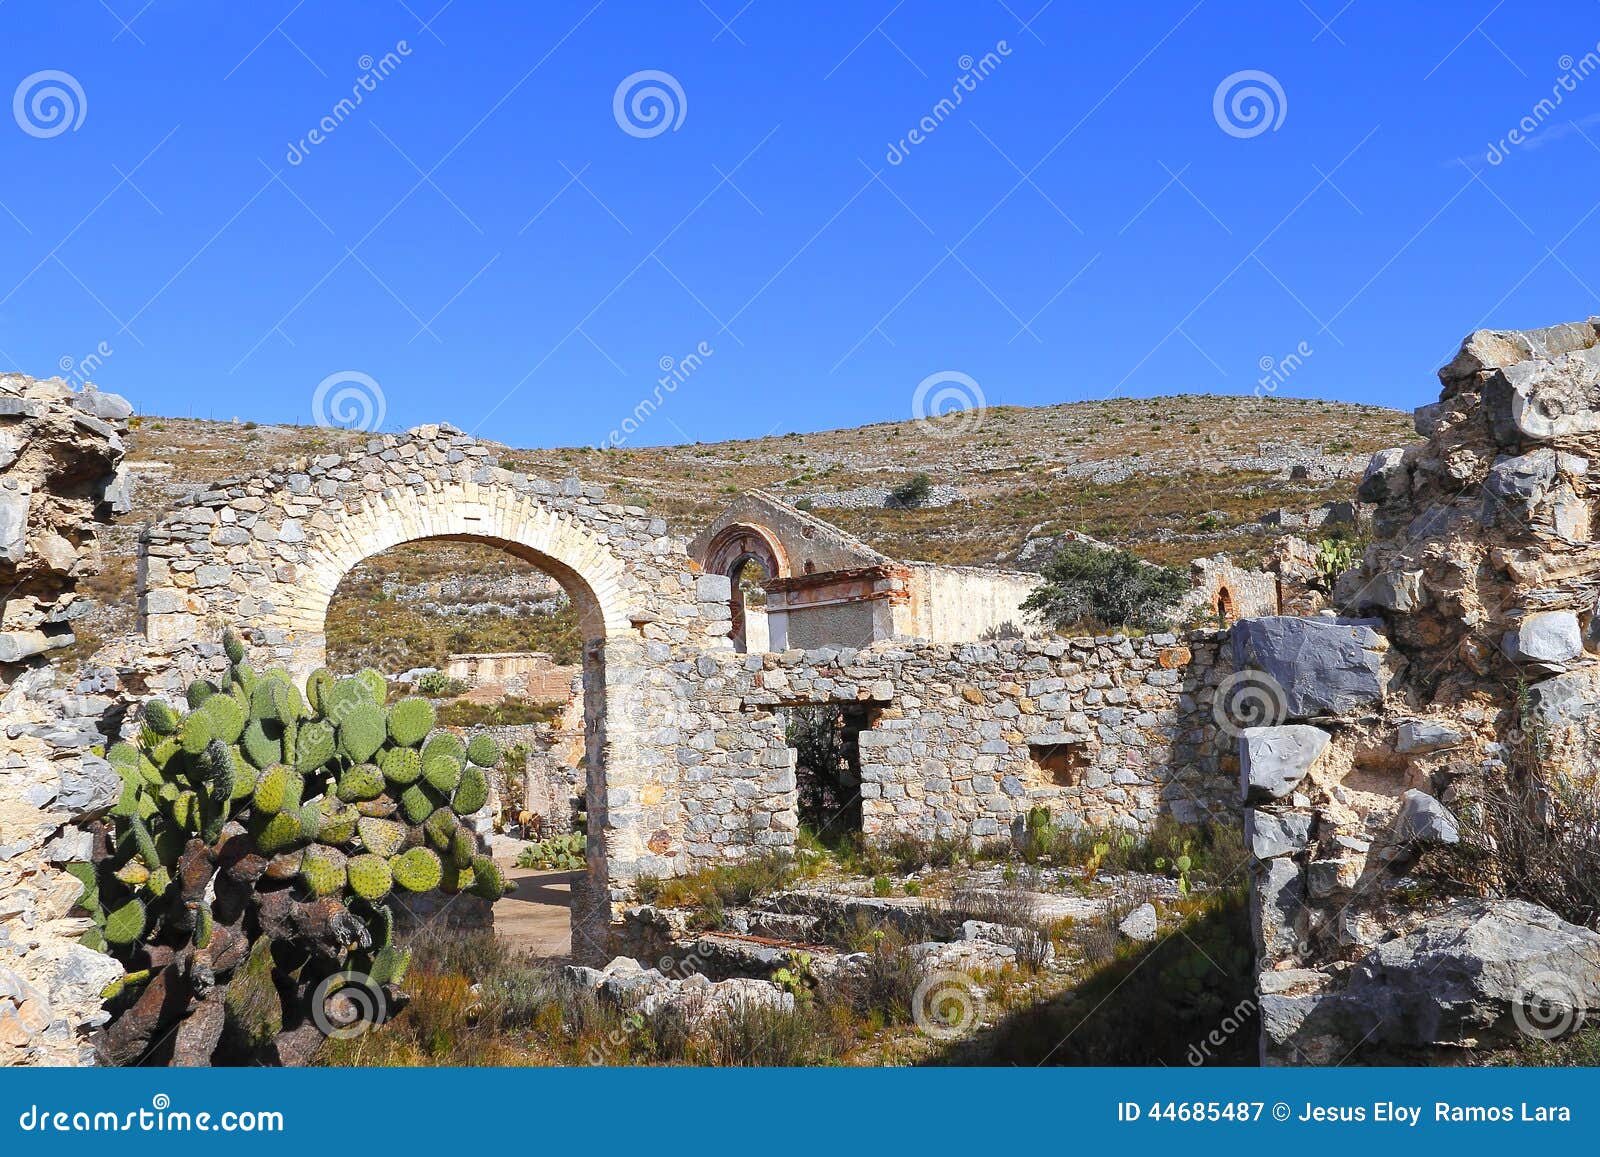 ruins in the desert of real de catorce, san luis potosi, mexico xii